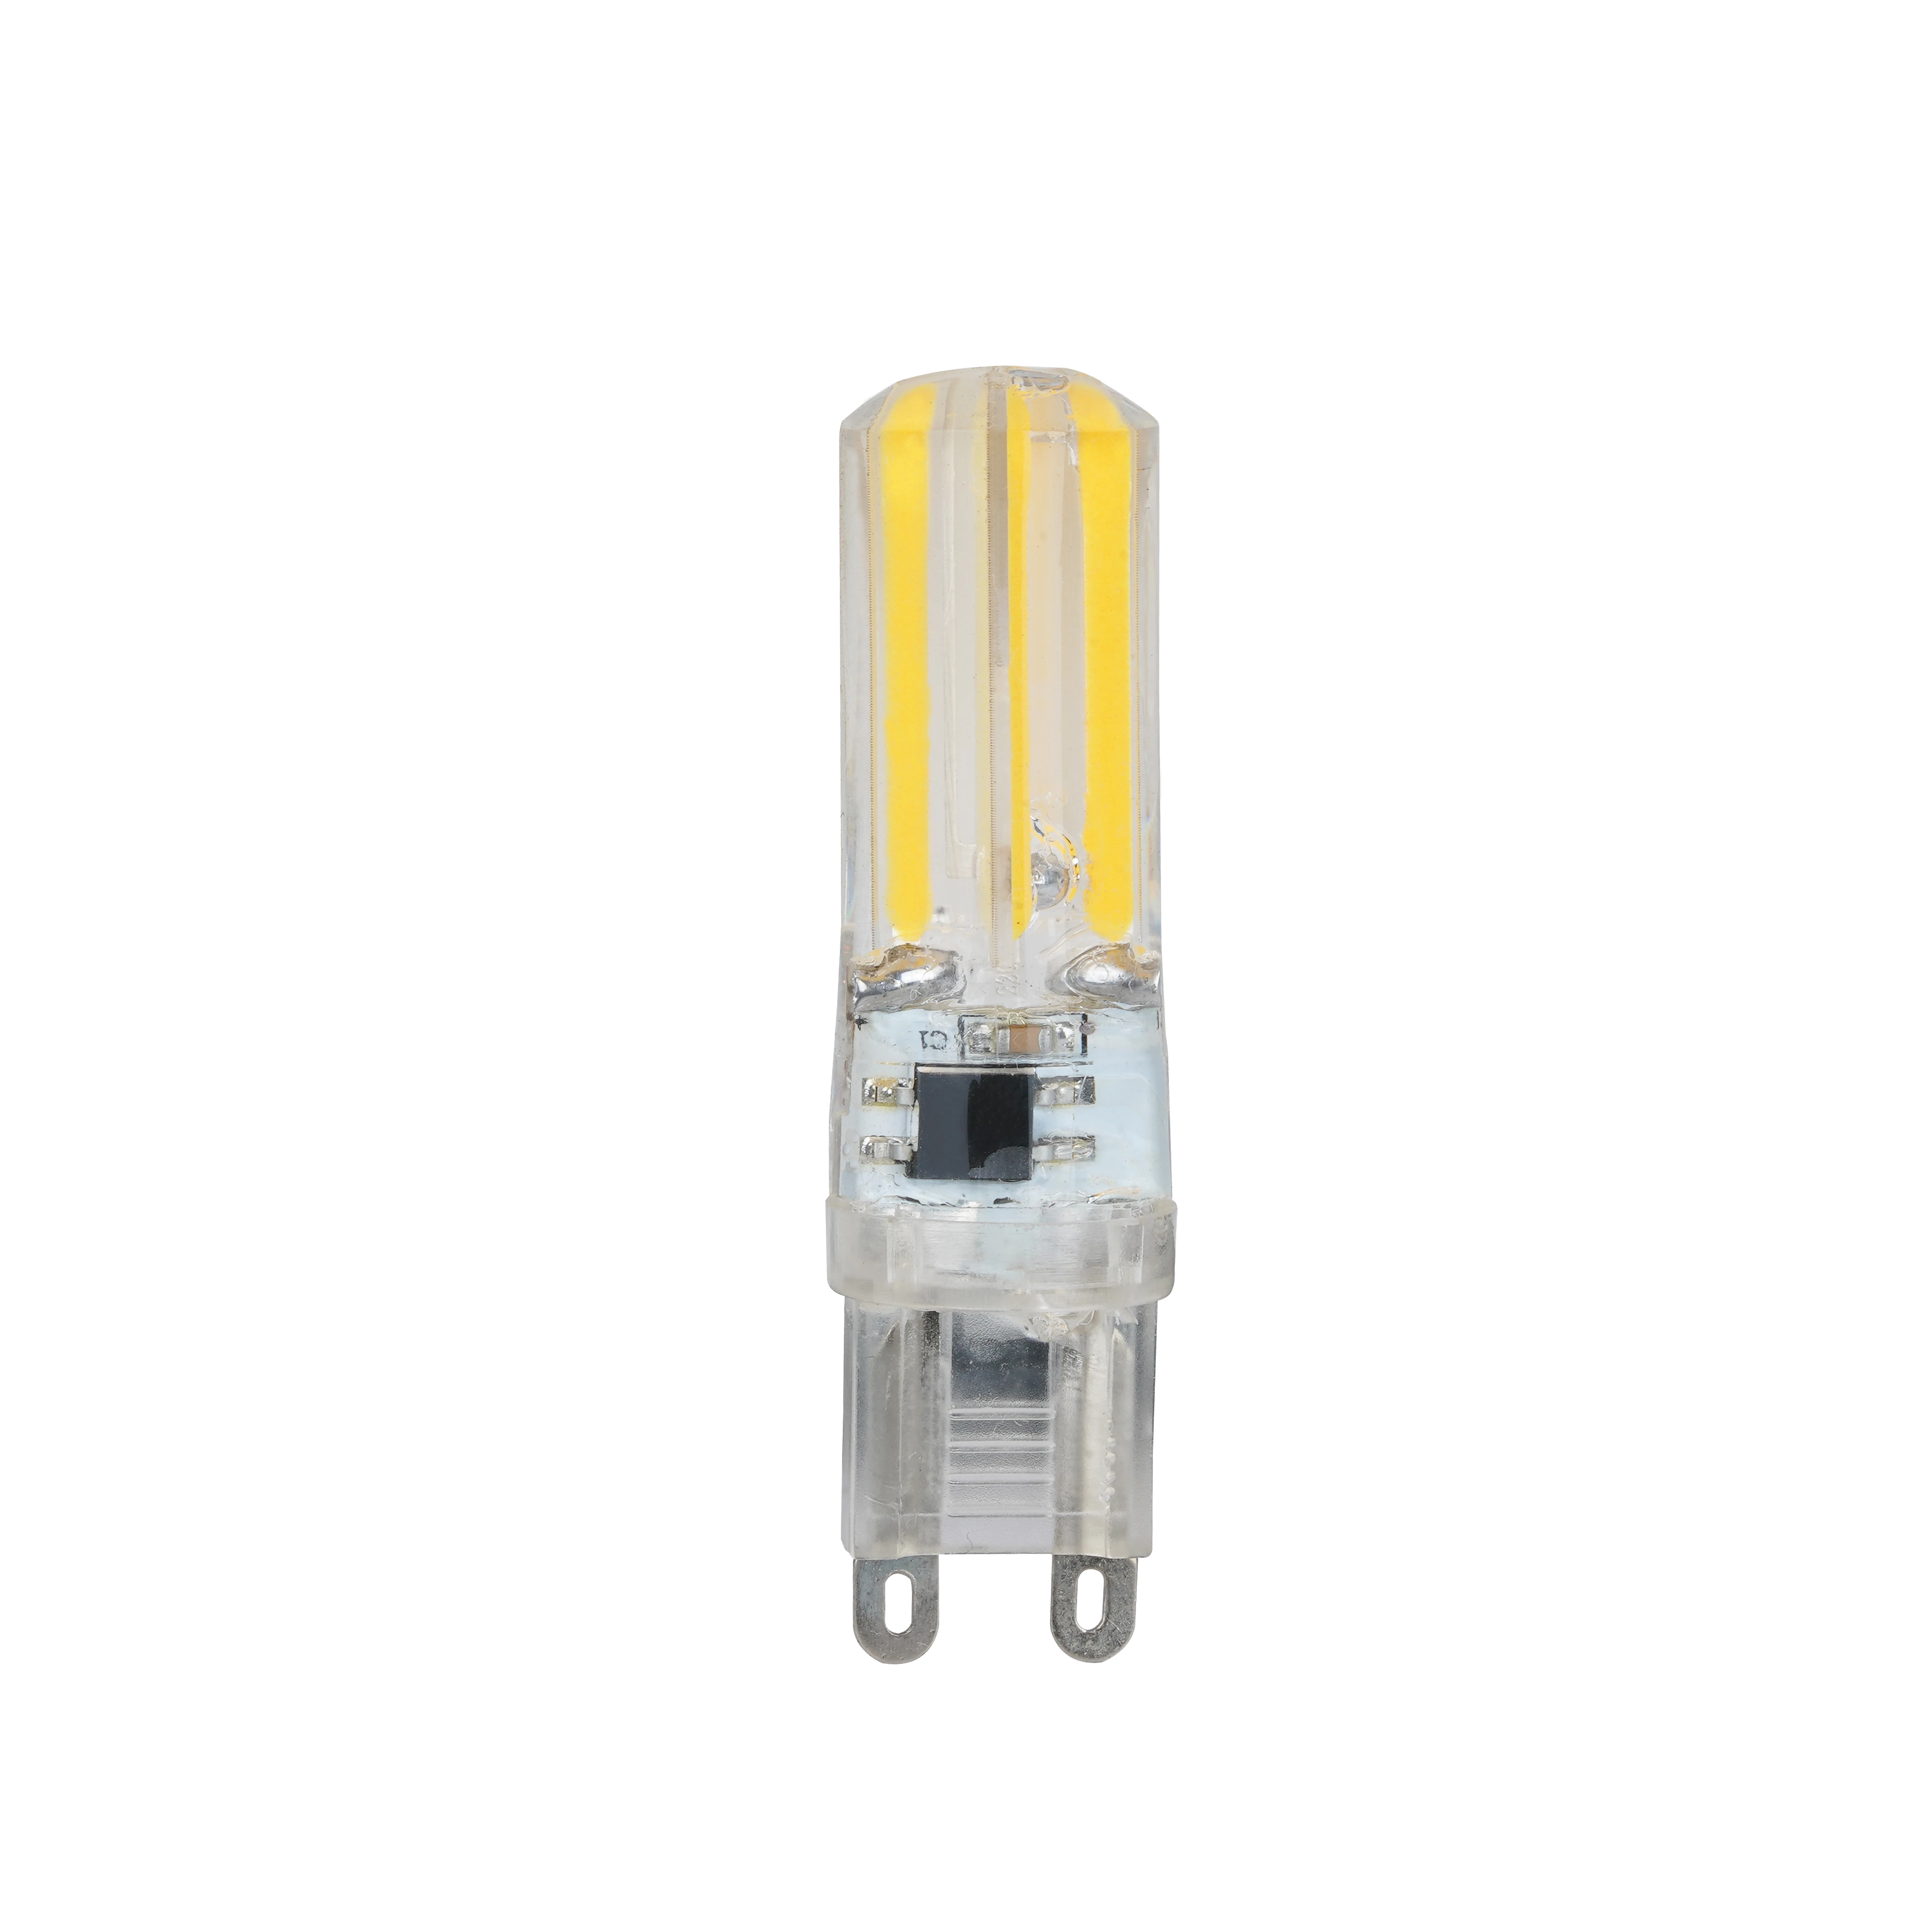 2020 Year New Design G9 LED High lumen 100lm/W Dimmable Light